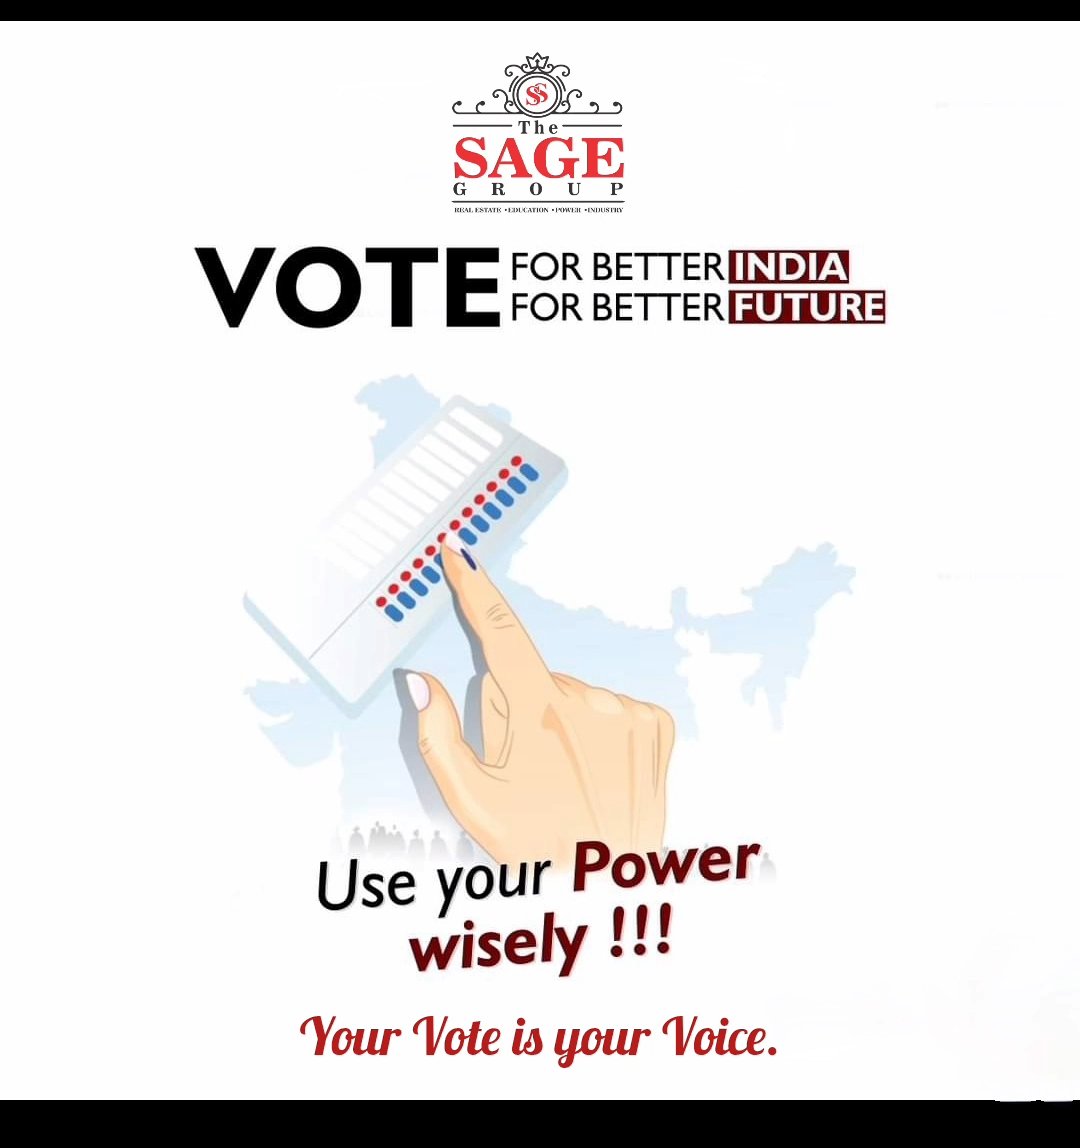 When we Vote, our values are put into Action and our Voices are Heard. Your Voice is a reminder that you Matter because you do, and you Deserve to be Heard.🙋🎤

#voting 
#vote
#election
#politics
#elections
#votingmatters
#votingrights 
#electionday  
#government
#thesagegroup